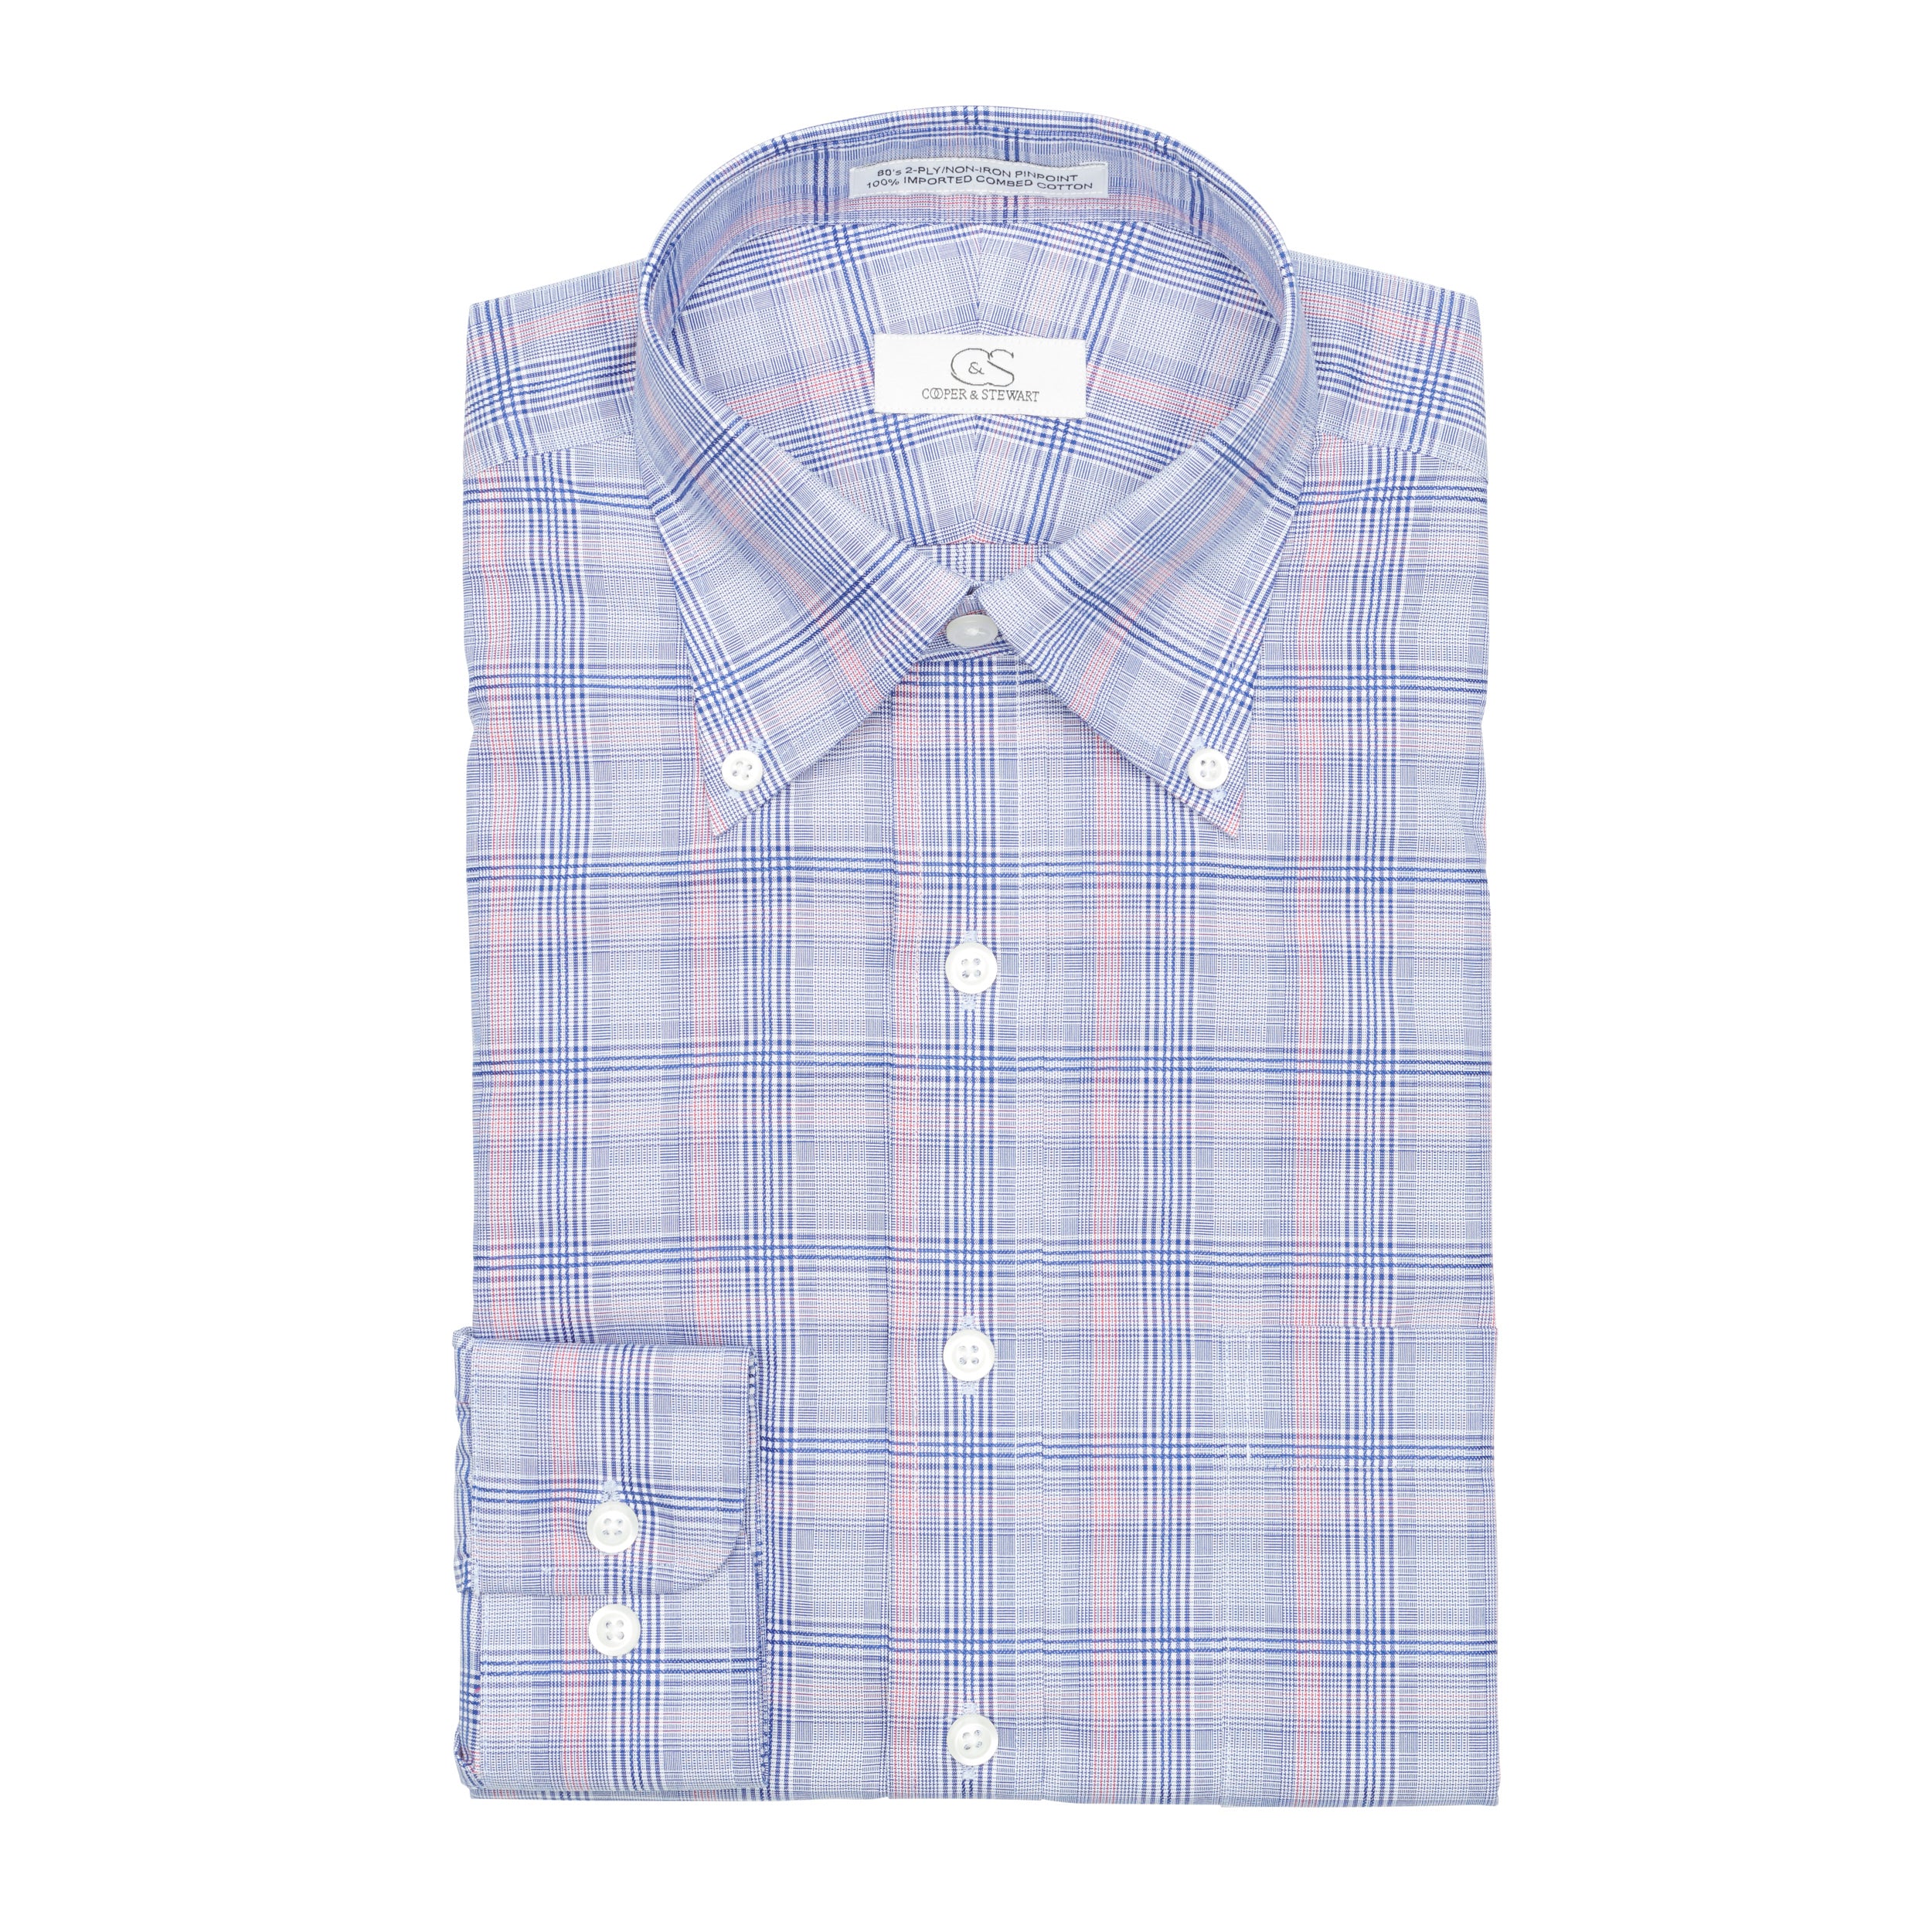 126 TF BD - Blue w/Coral Glen Plaid Tailored Fit Button Down Collar